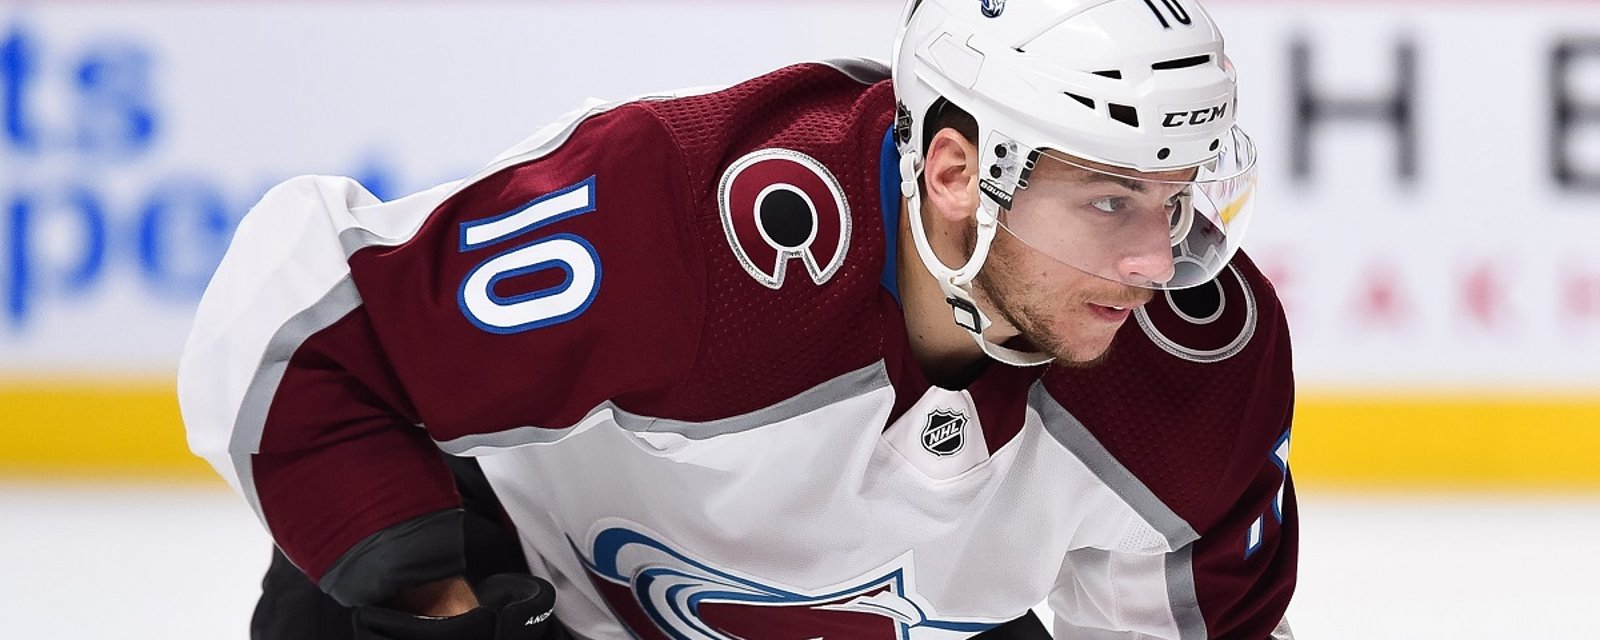 The Avalanche lose one of their forwards to the KHL.